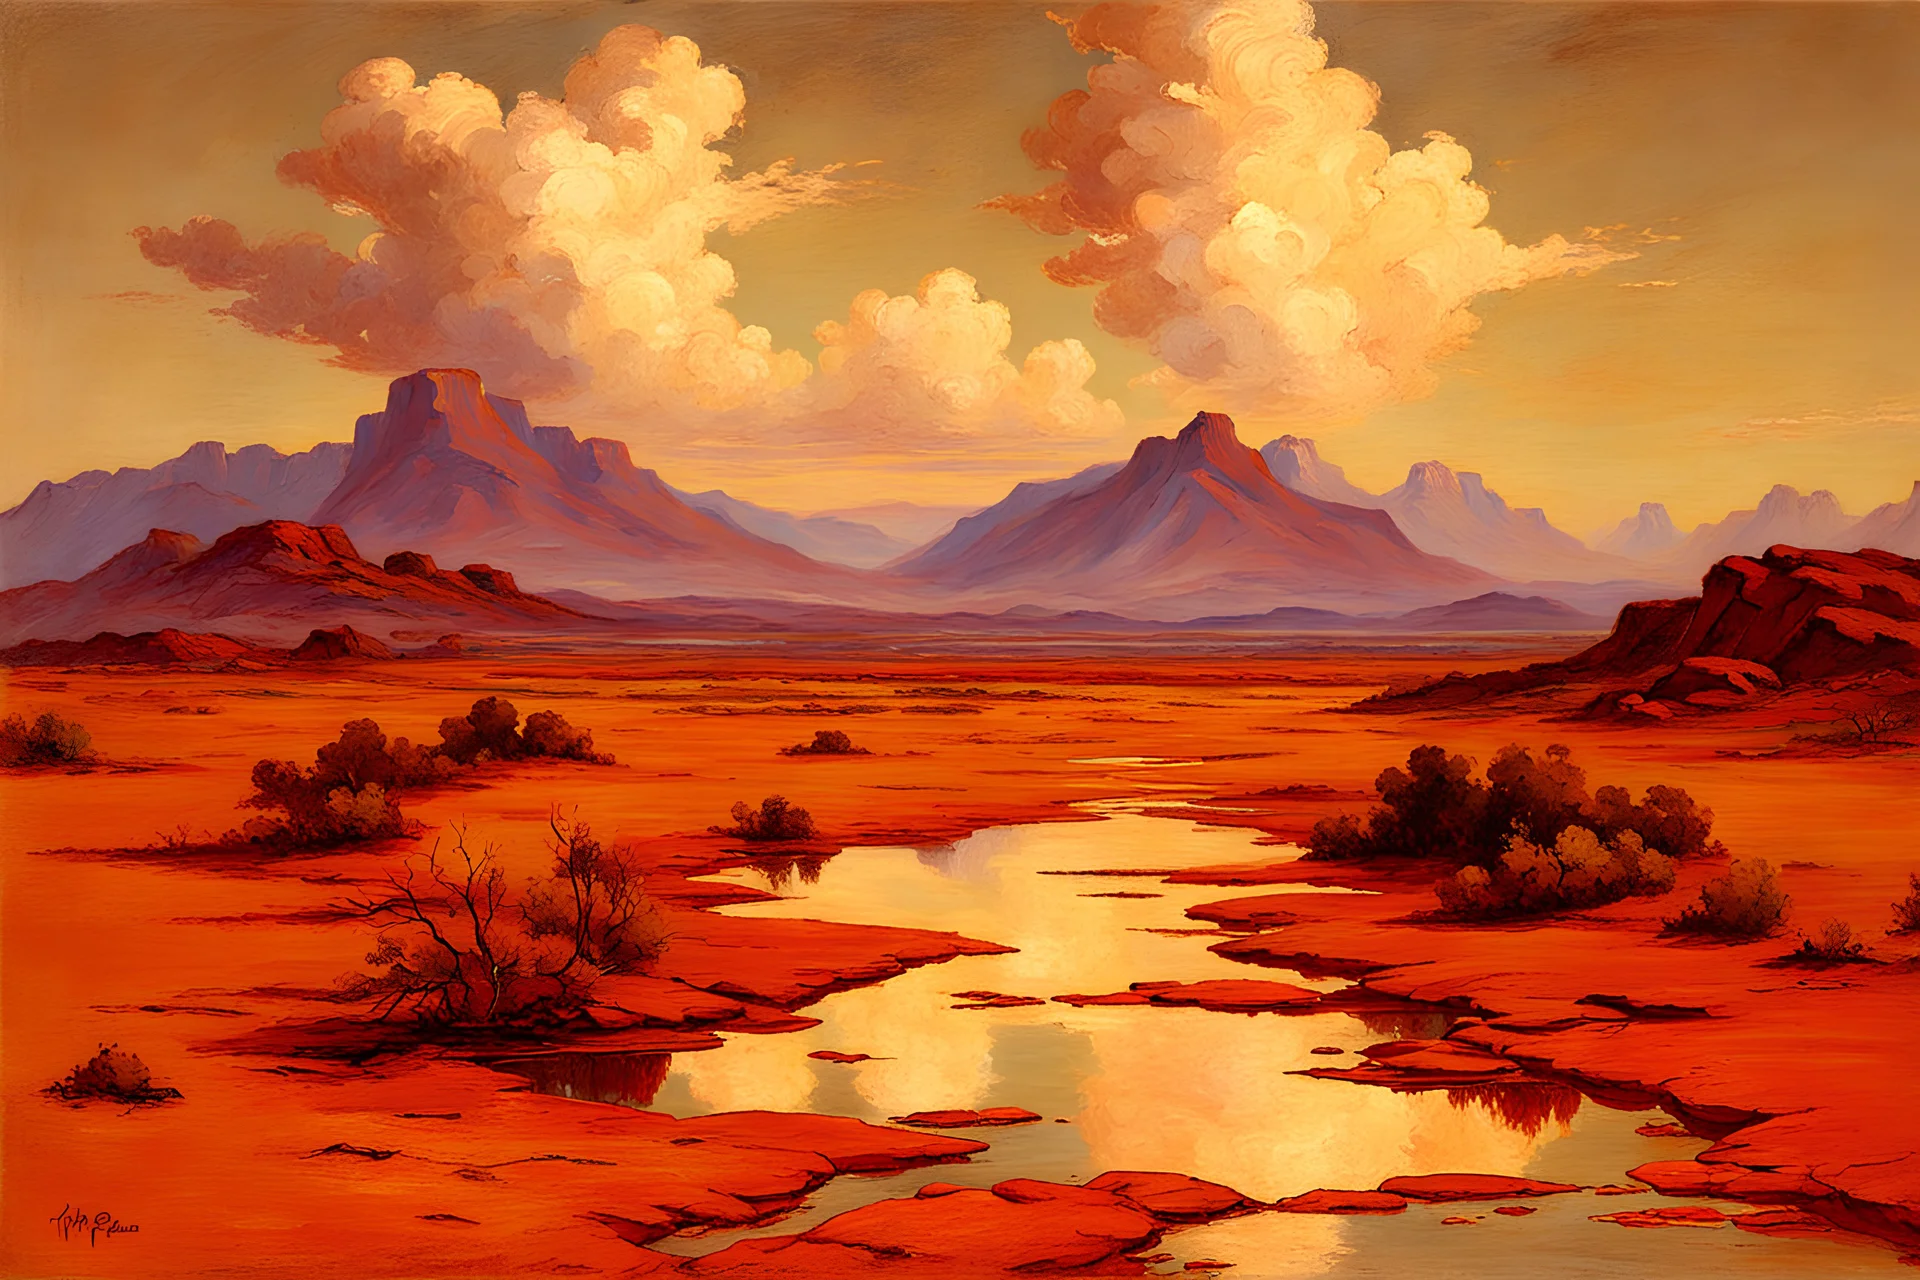 Arid land, clouds, mountains, rocks, puddle, vegetation, otto pippel impressionism painting